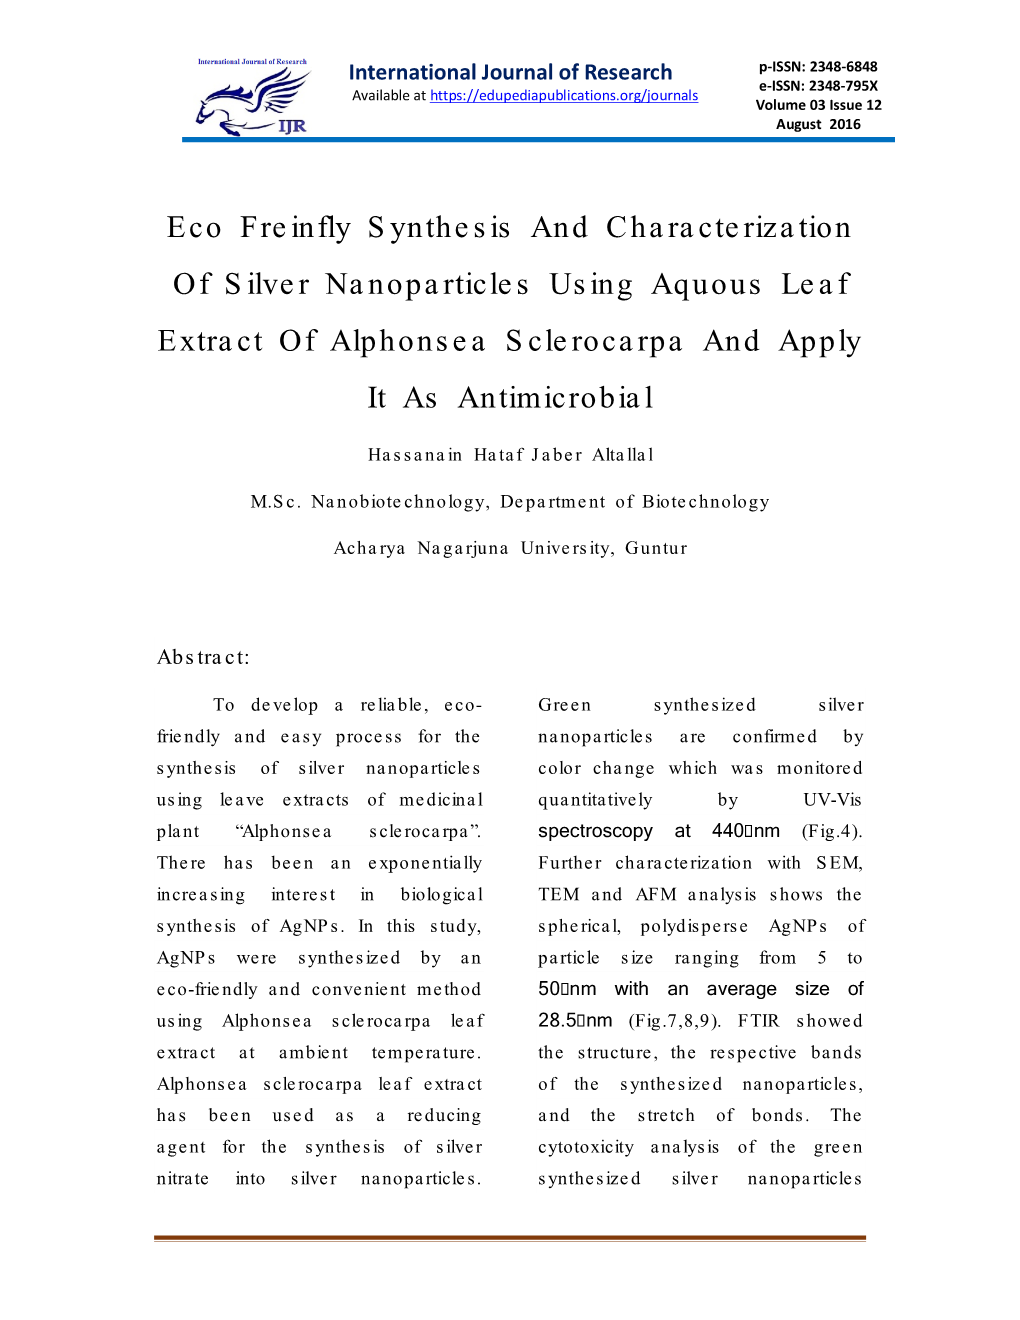 Eco Freinfly Synthesis and Characterization of Silver Nanoparticles Using Aquous Leaf Extract of Alphonsea Sclerocarpa and Apply It As Antimicrobial